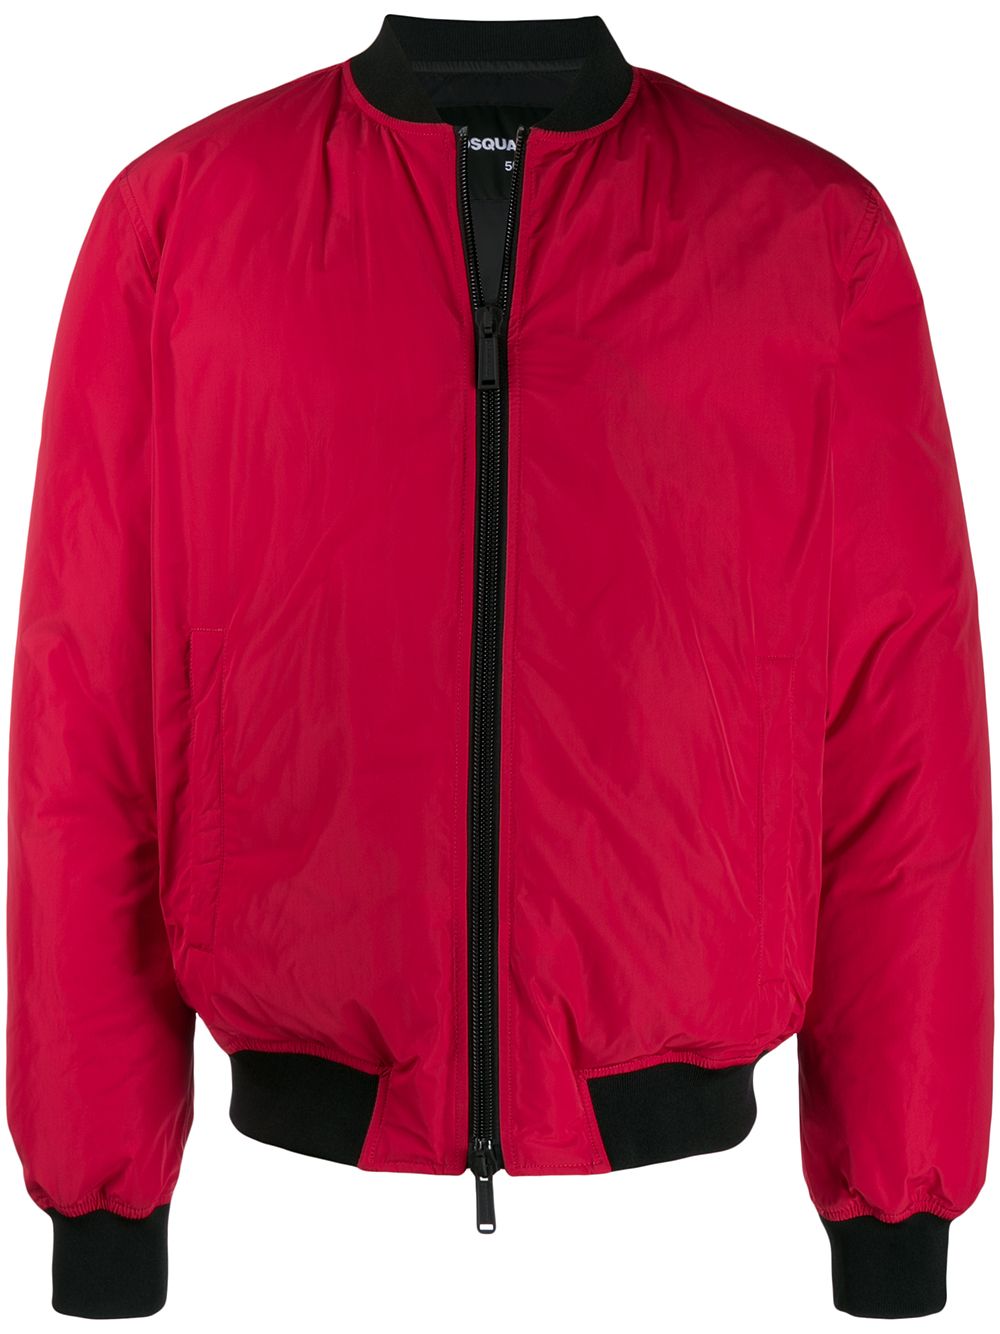 dsquared2 red jacket